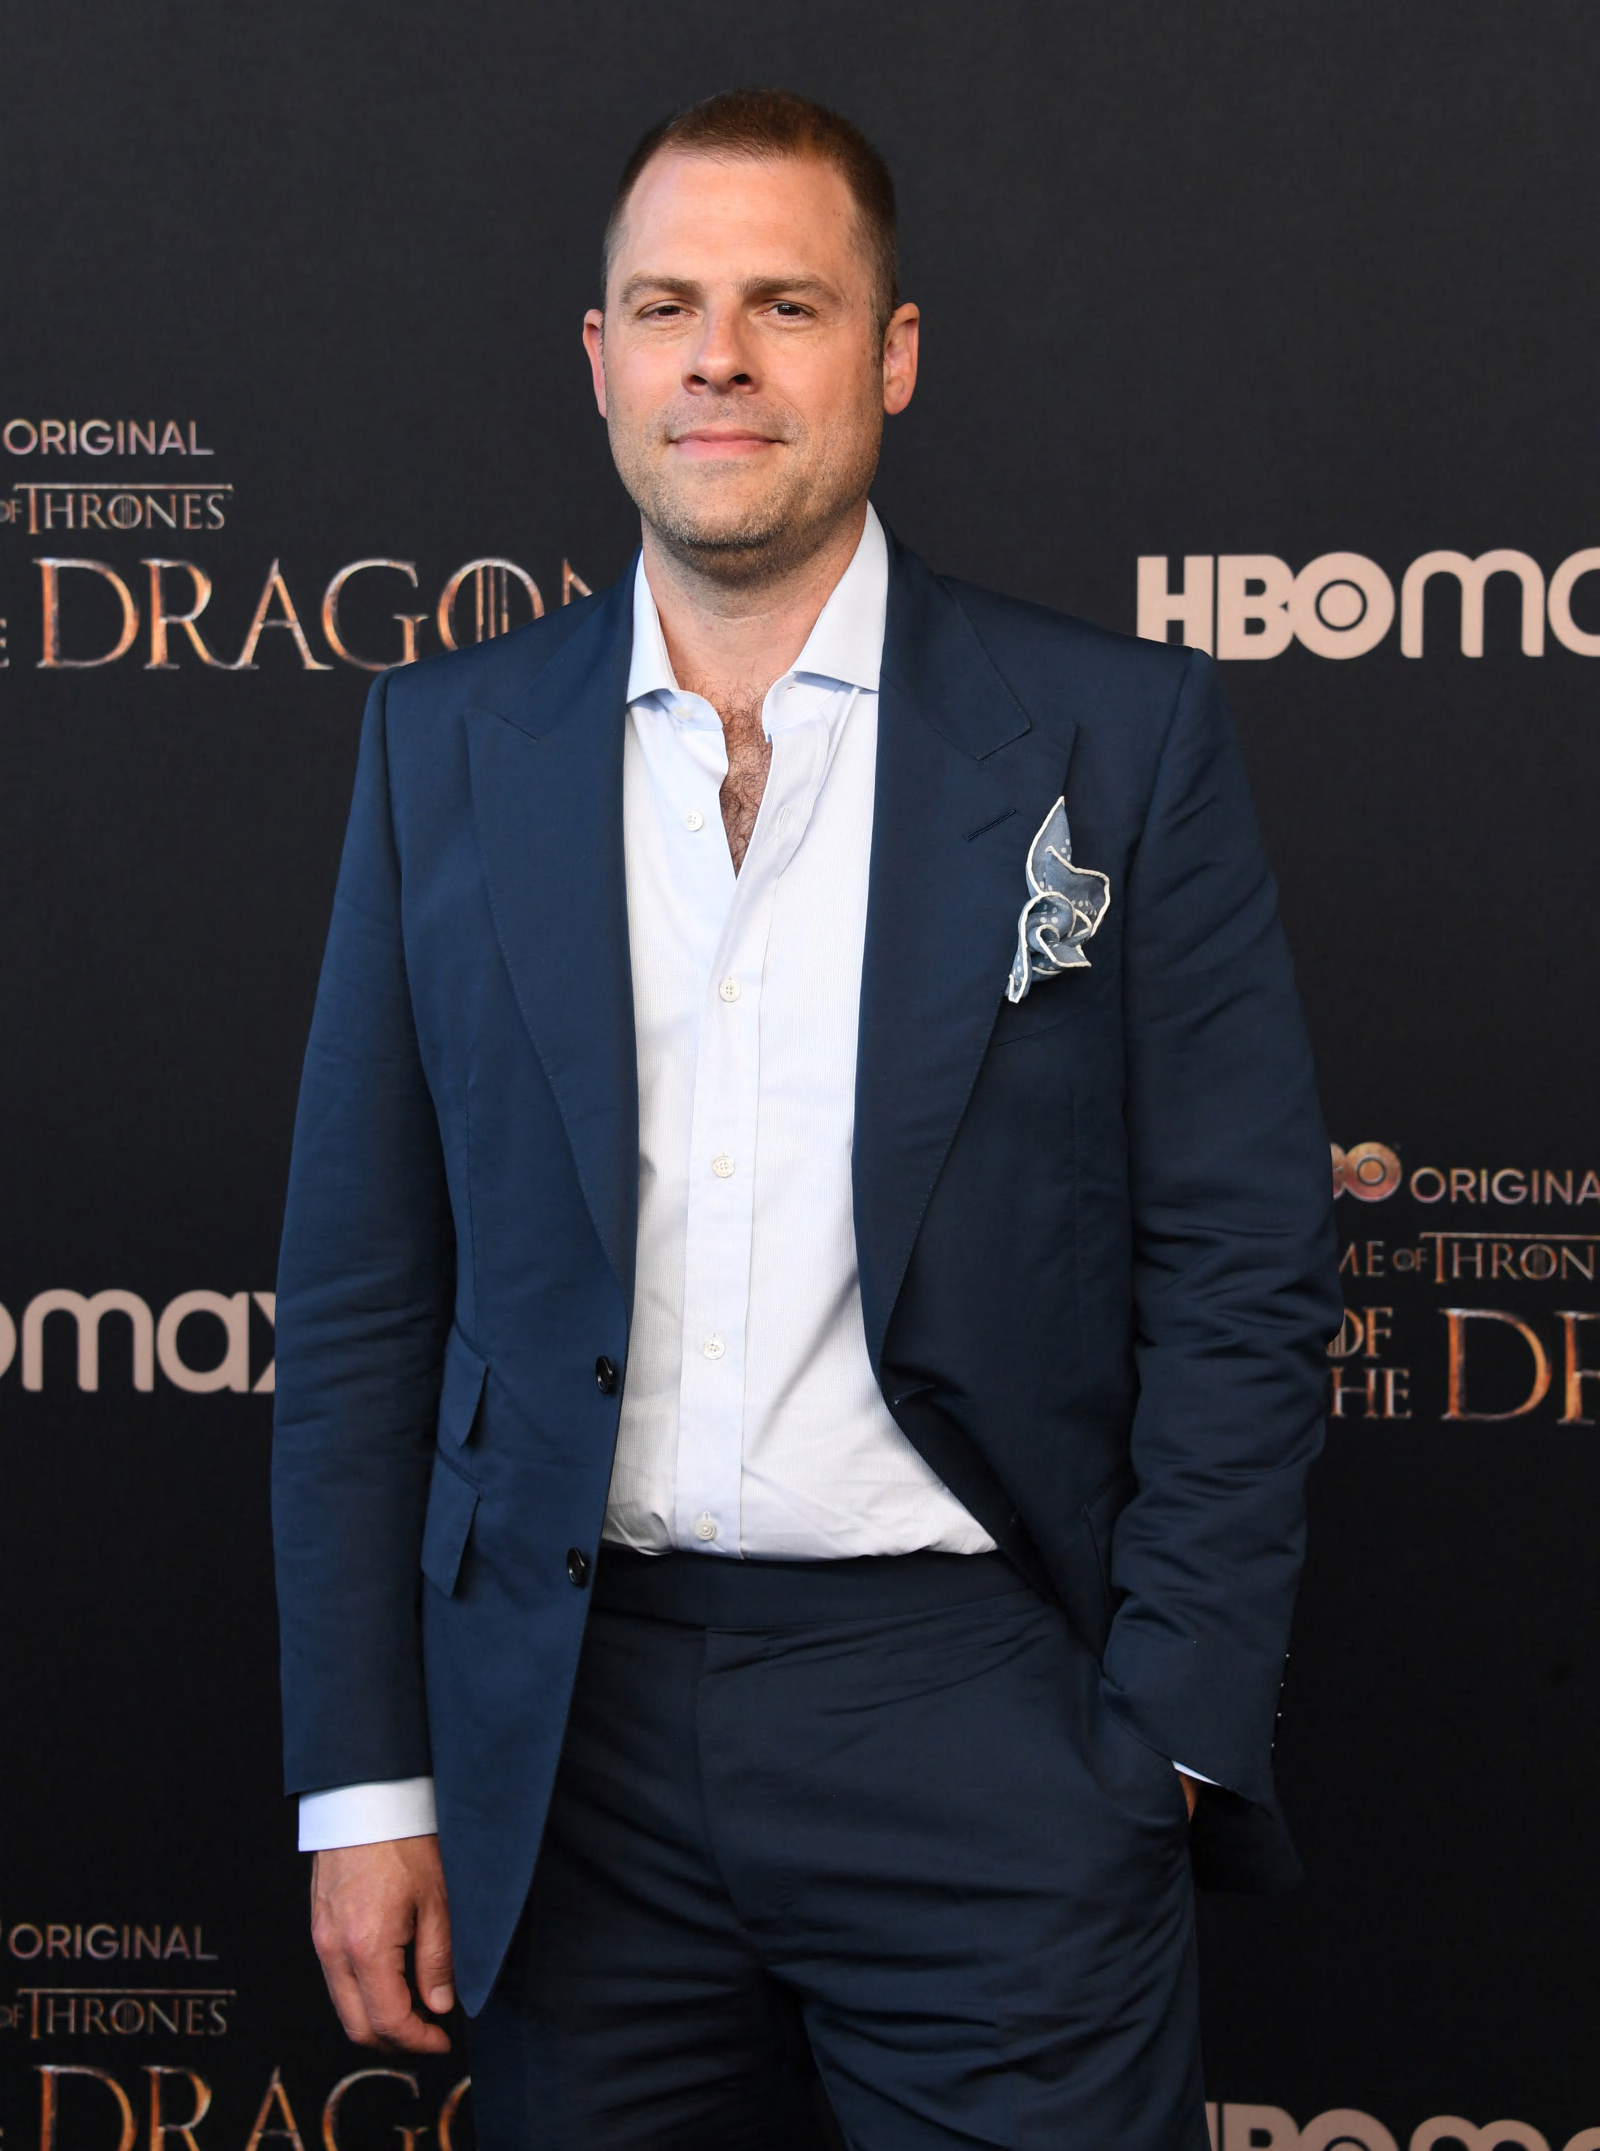 The cast and crew steps out in style for the House of the Dragon premiere